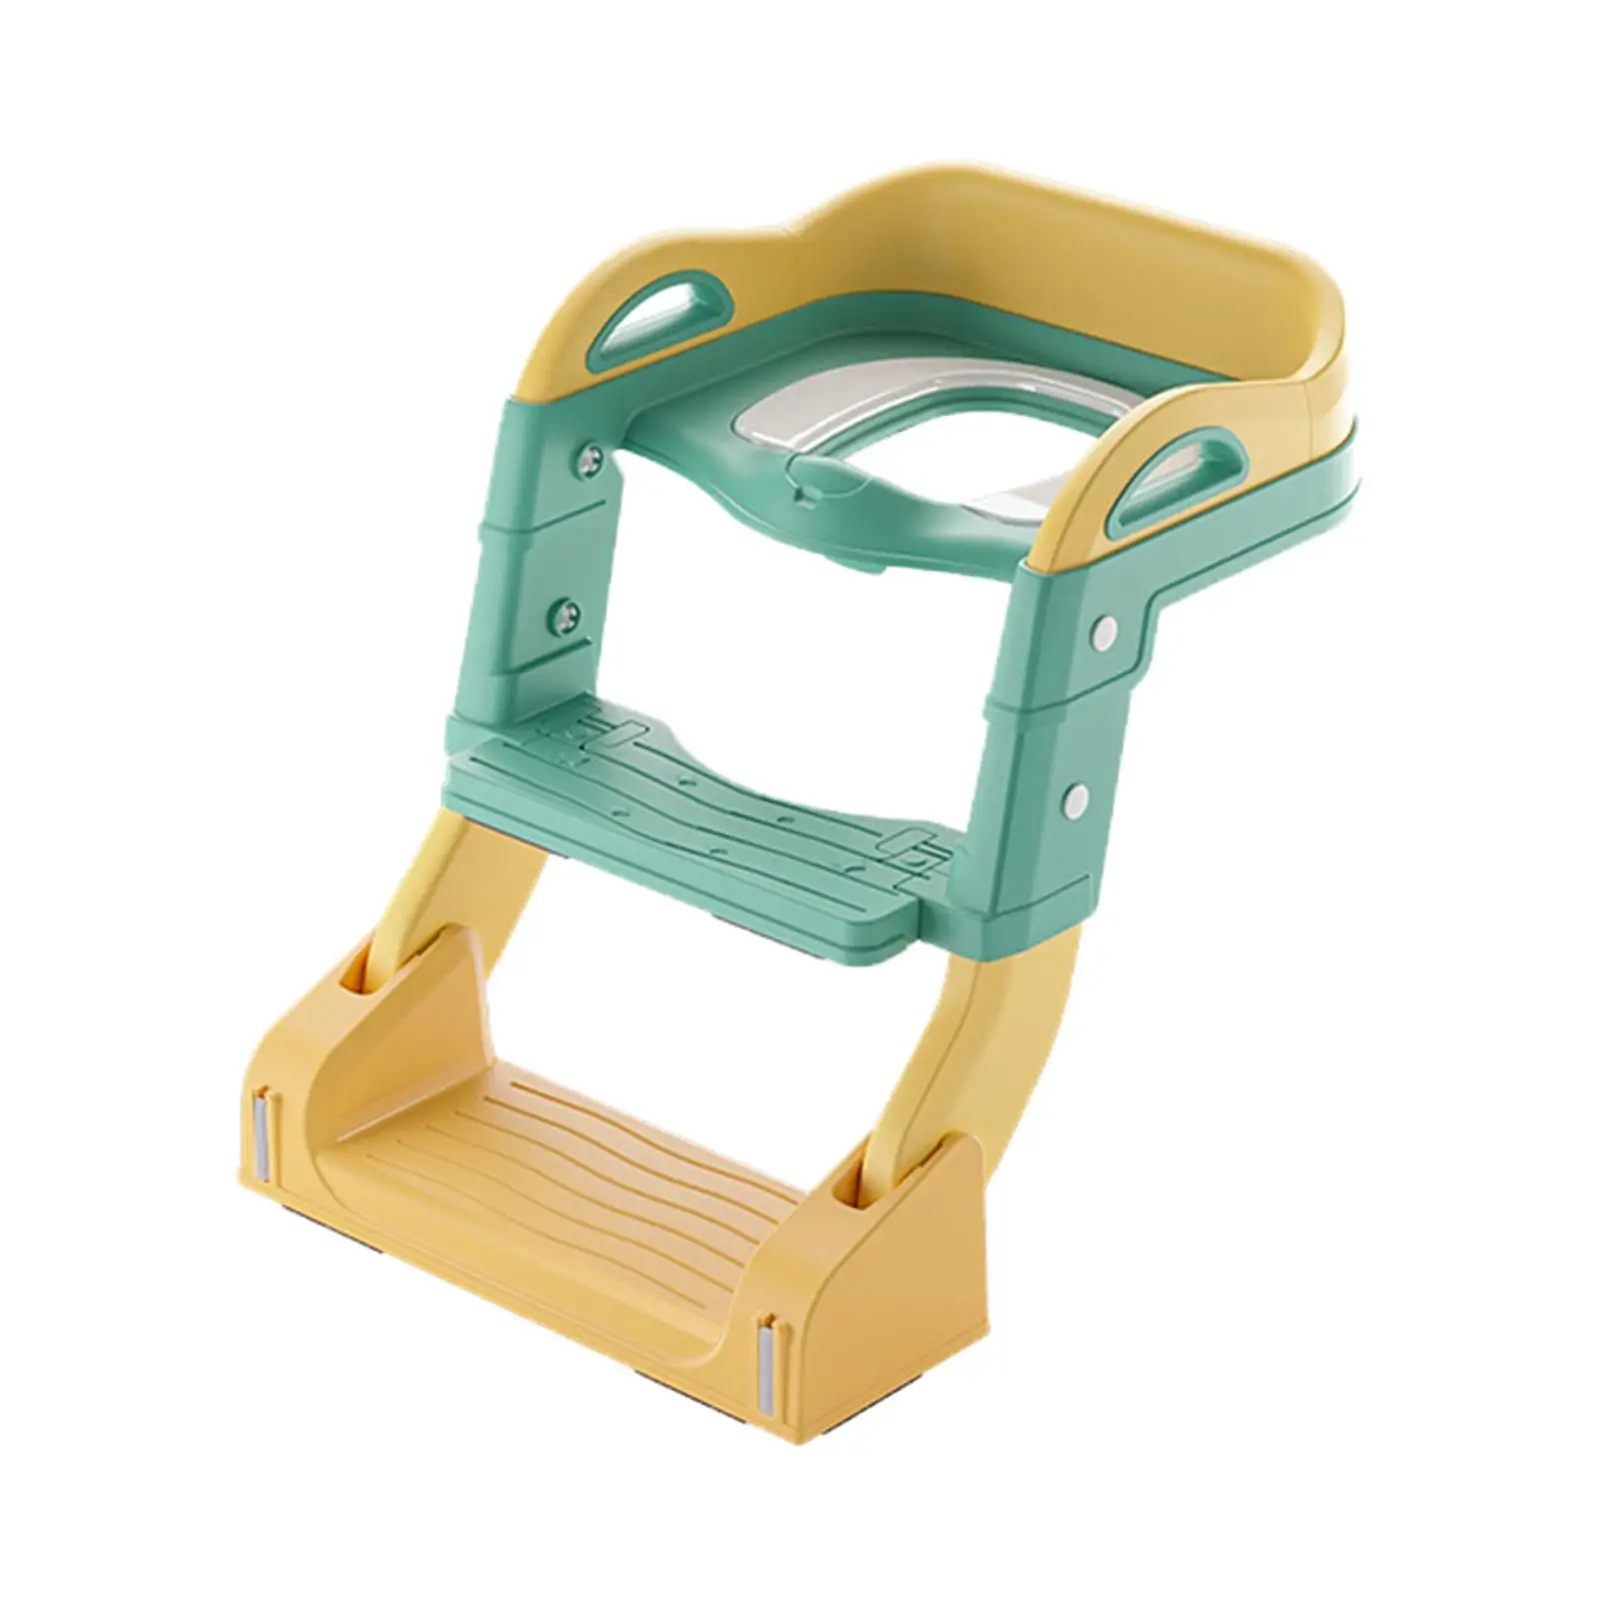 Kids Toilet Training Seat Step Stool Ladder Baby Infant Potty Boy Girl Potty Foldable Child Comfortable Toilet Trainer Seat